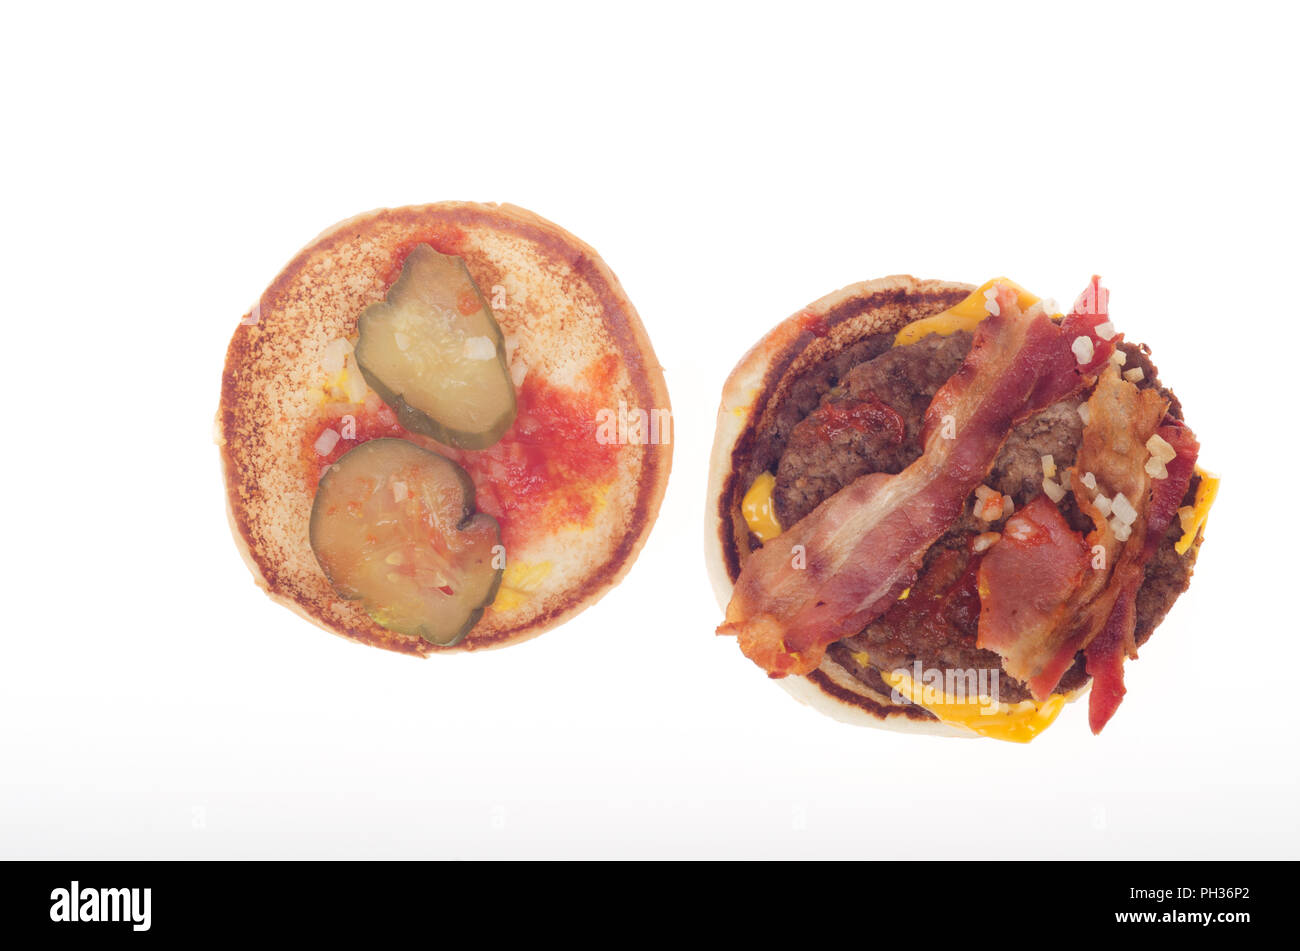 McDonalds Bacon McDouble Cheeseburger open showing bacon, burgers, pickles, onions,  ketchup and cheese Stock Photo